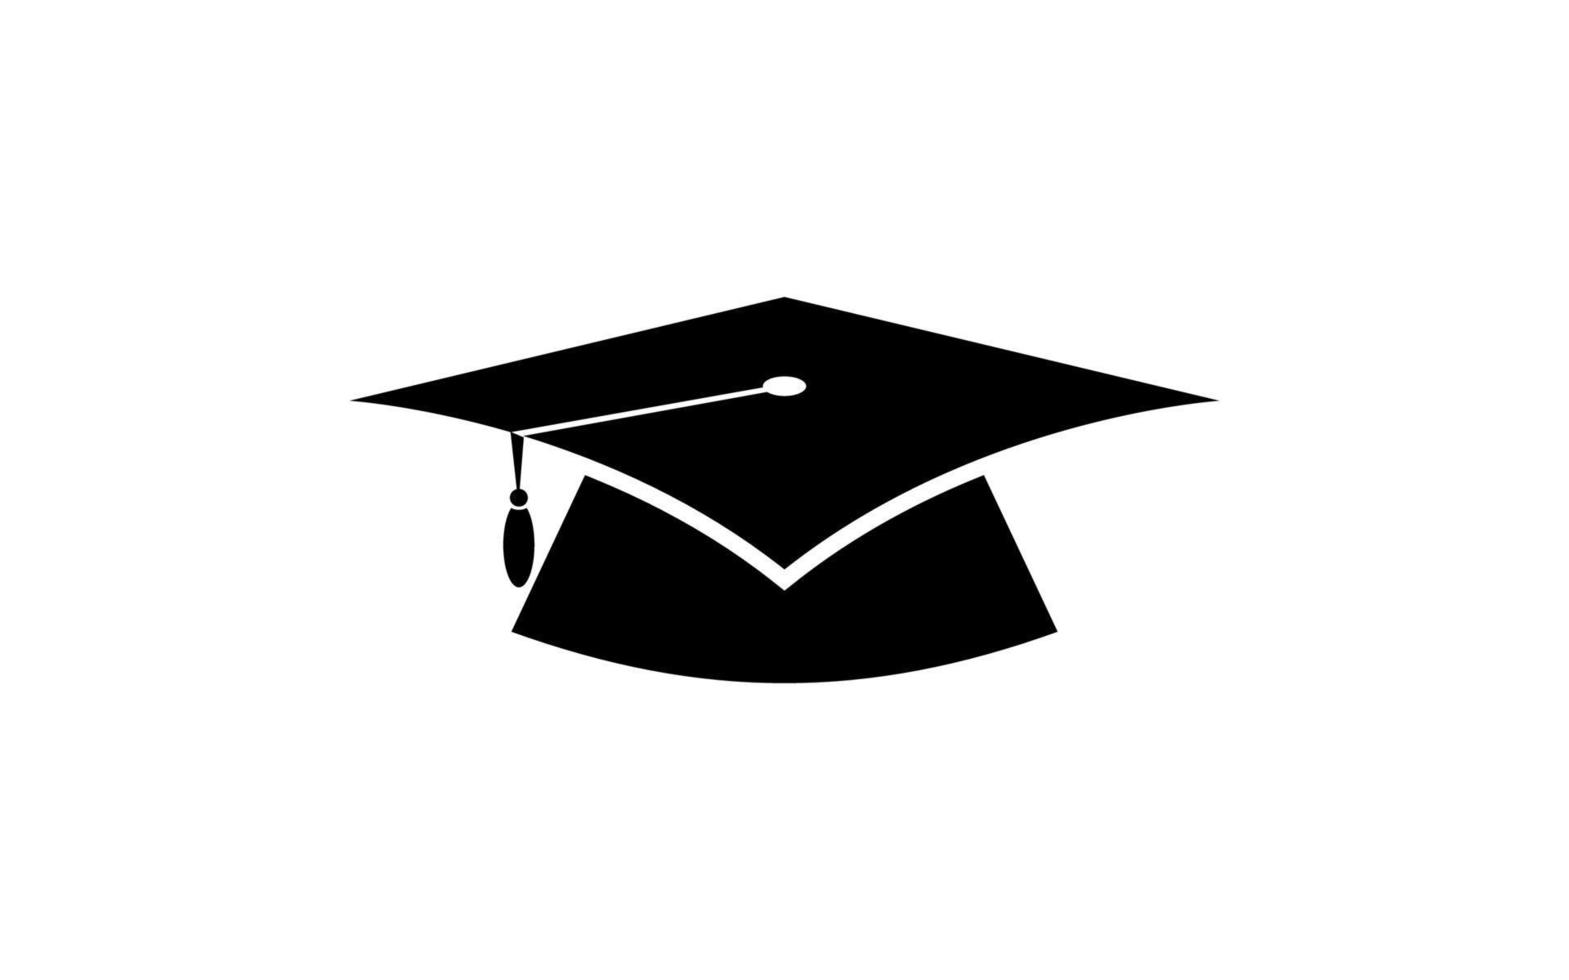 Graduate college, high school or university cap isolated on white background vector